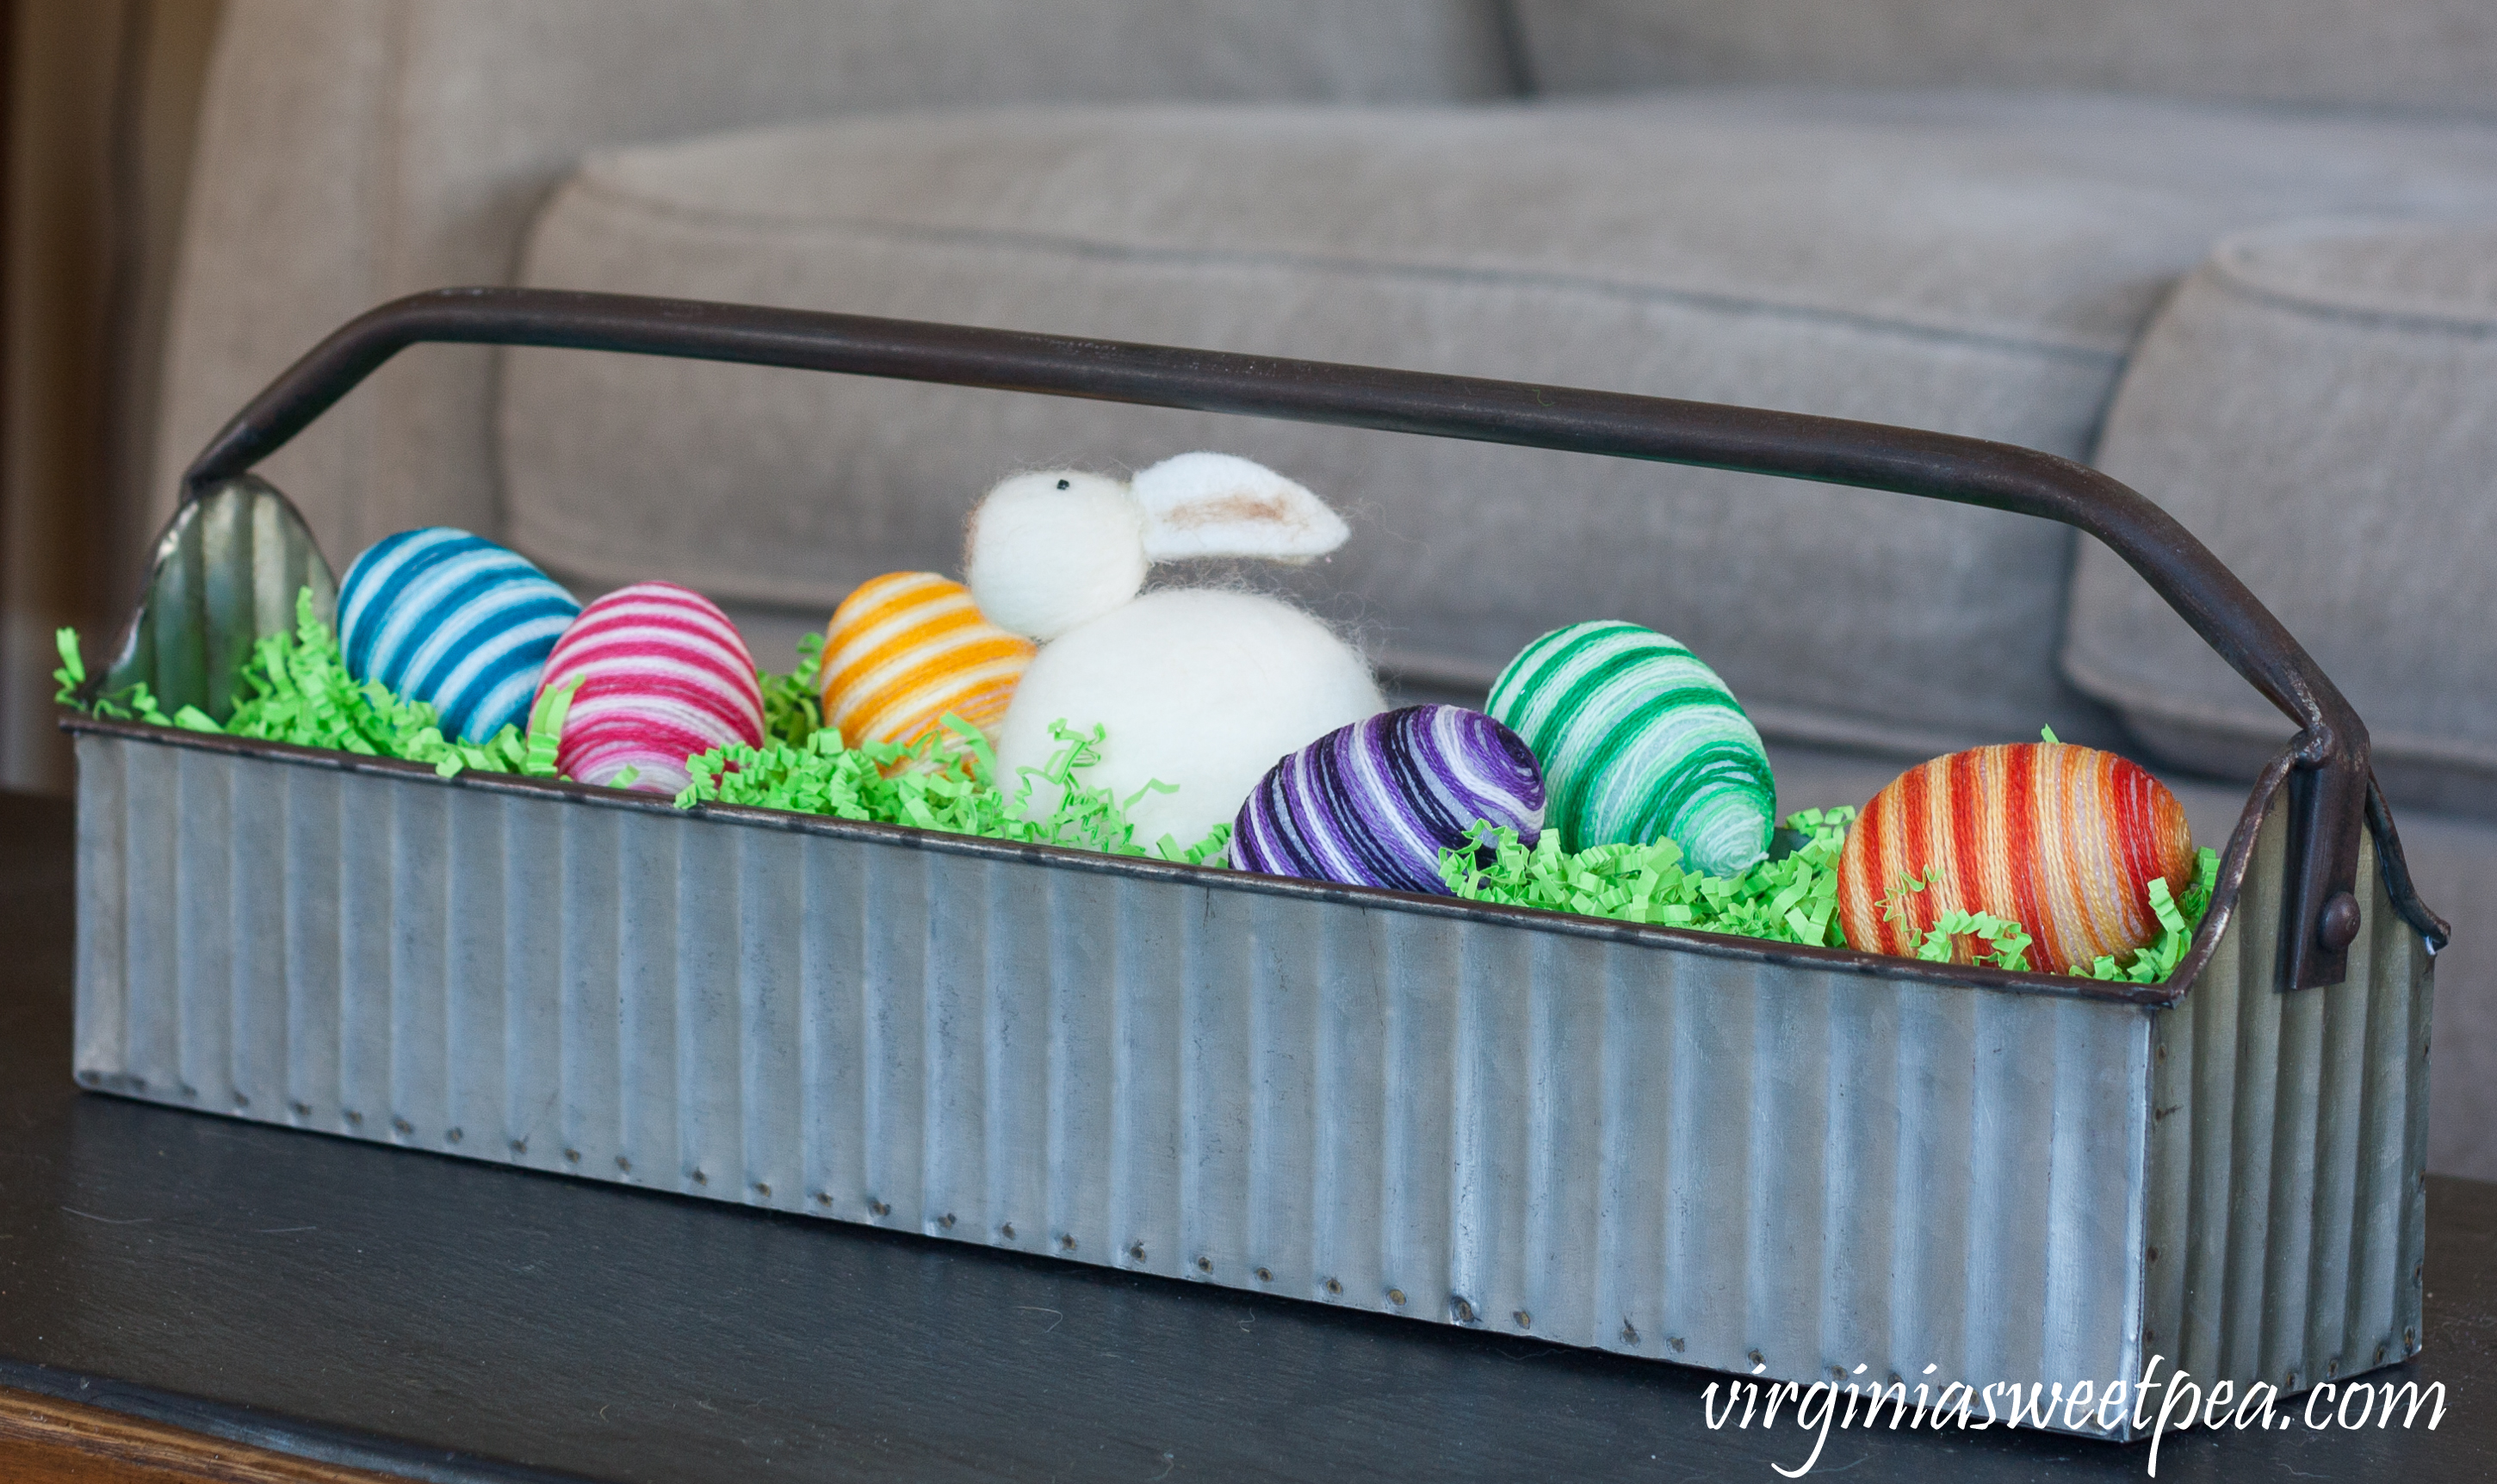 Metal tool caddy decorated for Easter with handmade striped eggs and a stuffed Easter rabbit.